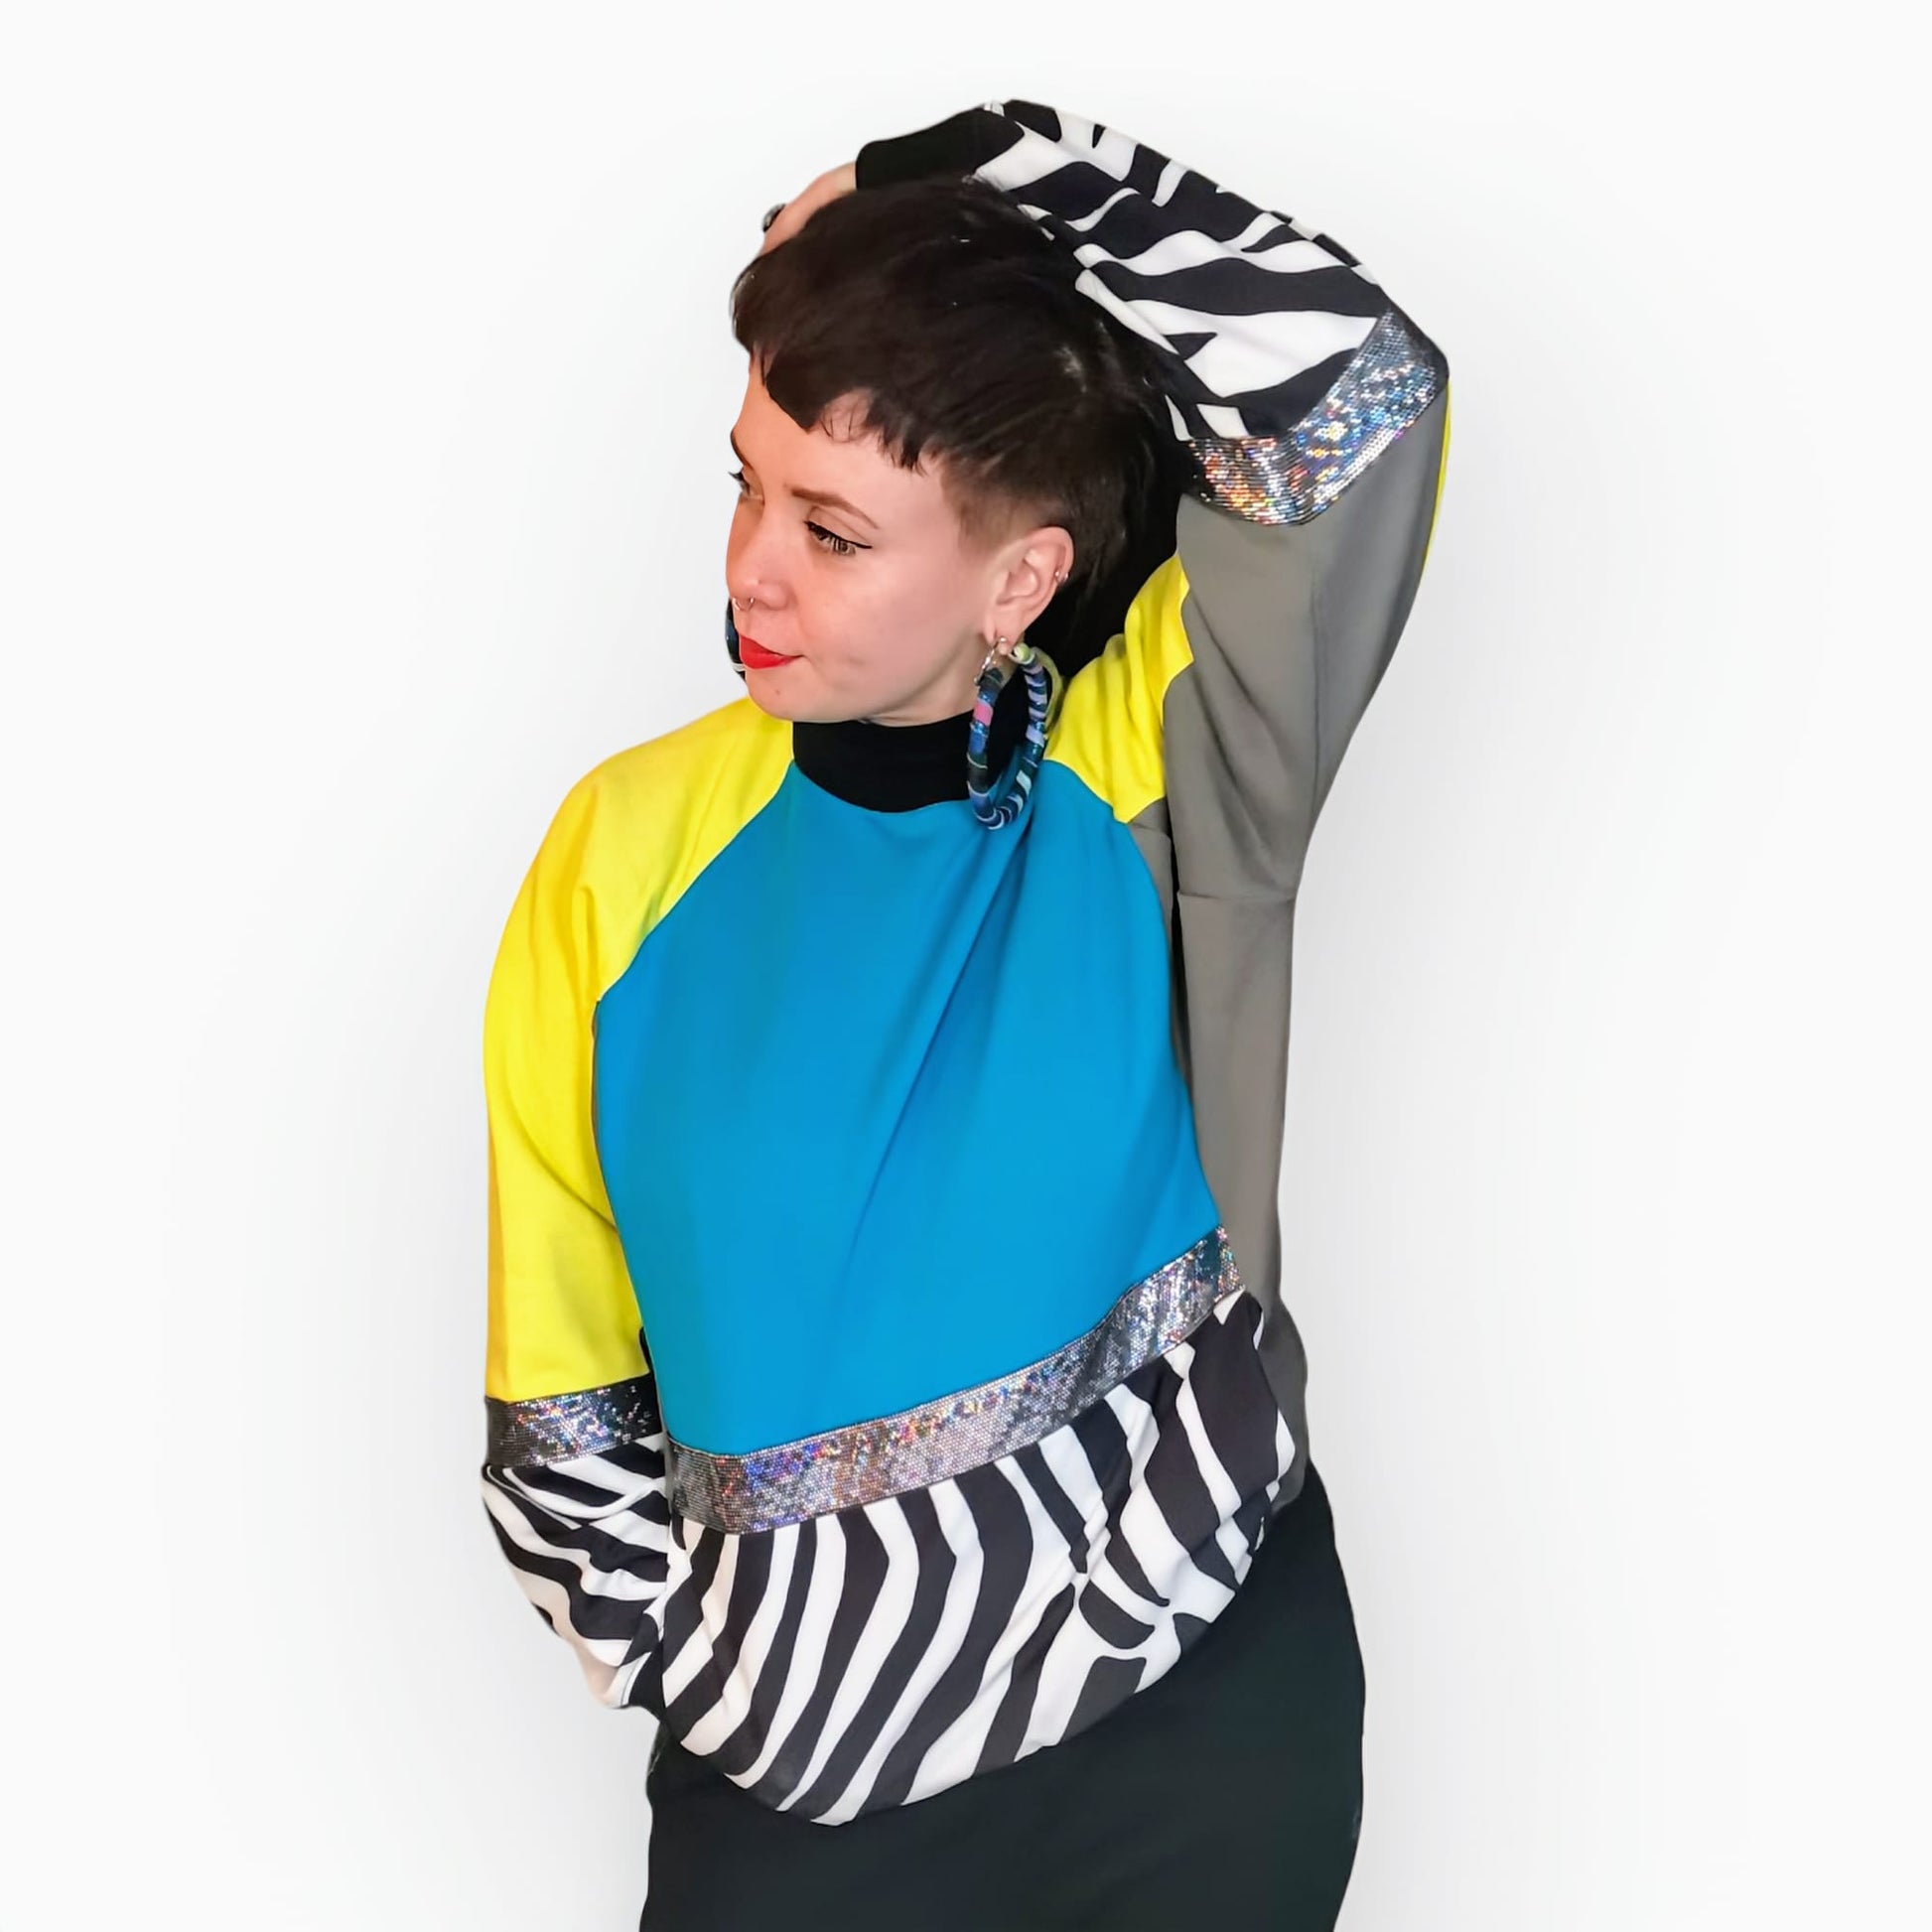 Model Hannah wears Blue Zebra Sweatshirt, a limited edition, off-the-peg piece in blue, yellow and grey sweatshirt fleece with black and white zebra print spandex details. The unisex design features a raglan sleeve, a large printed spandex front pouch pocket, matching upper arm panels, silver hologram foiled stripes and black rib cuffs, waistband and neck. They also wear MayHem fabric wrap large hoop earrings. Font view.